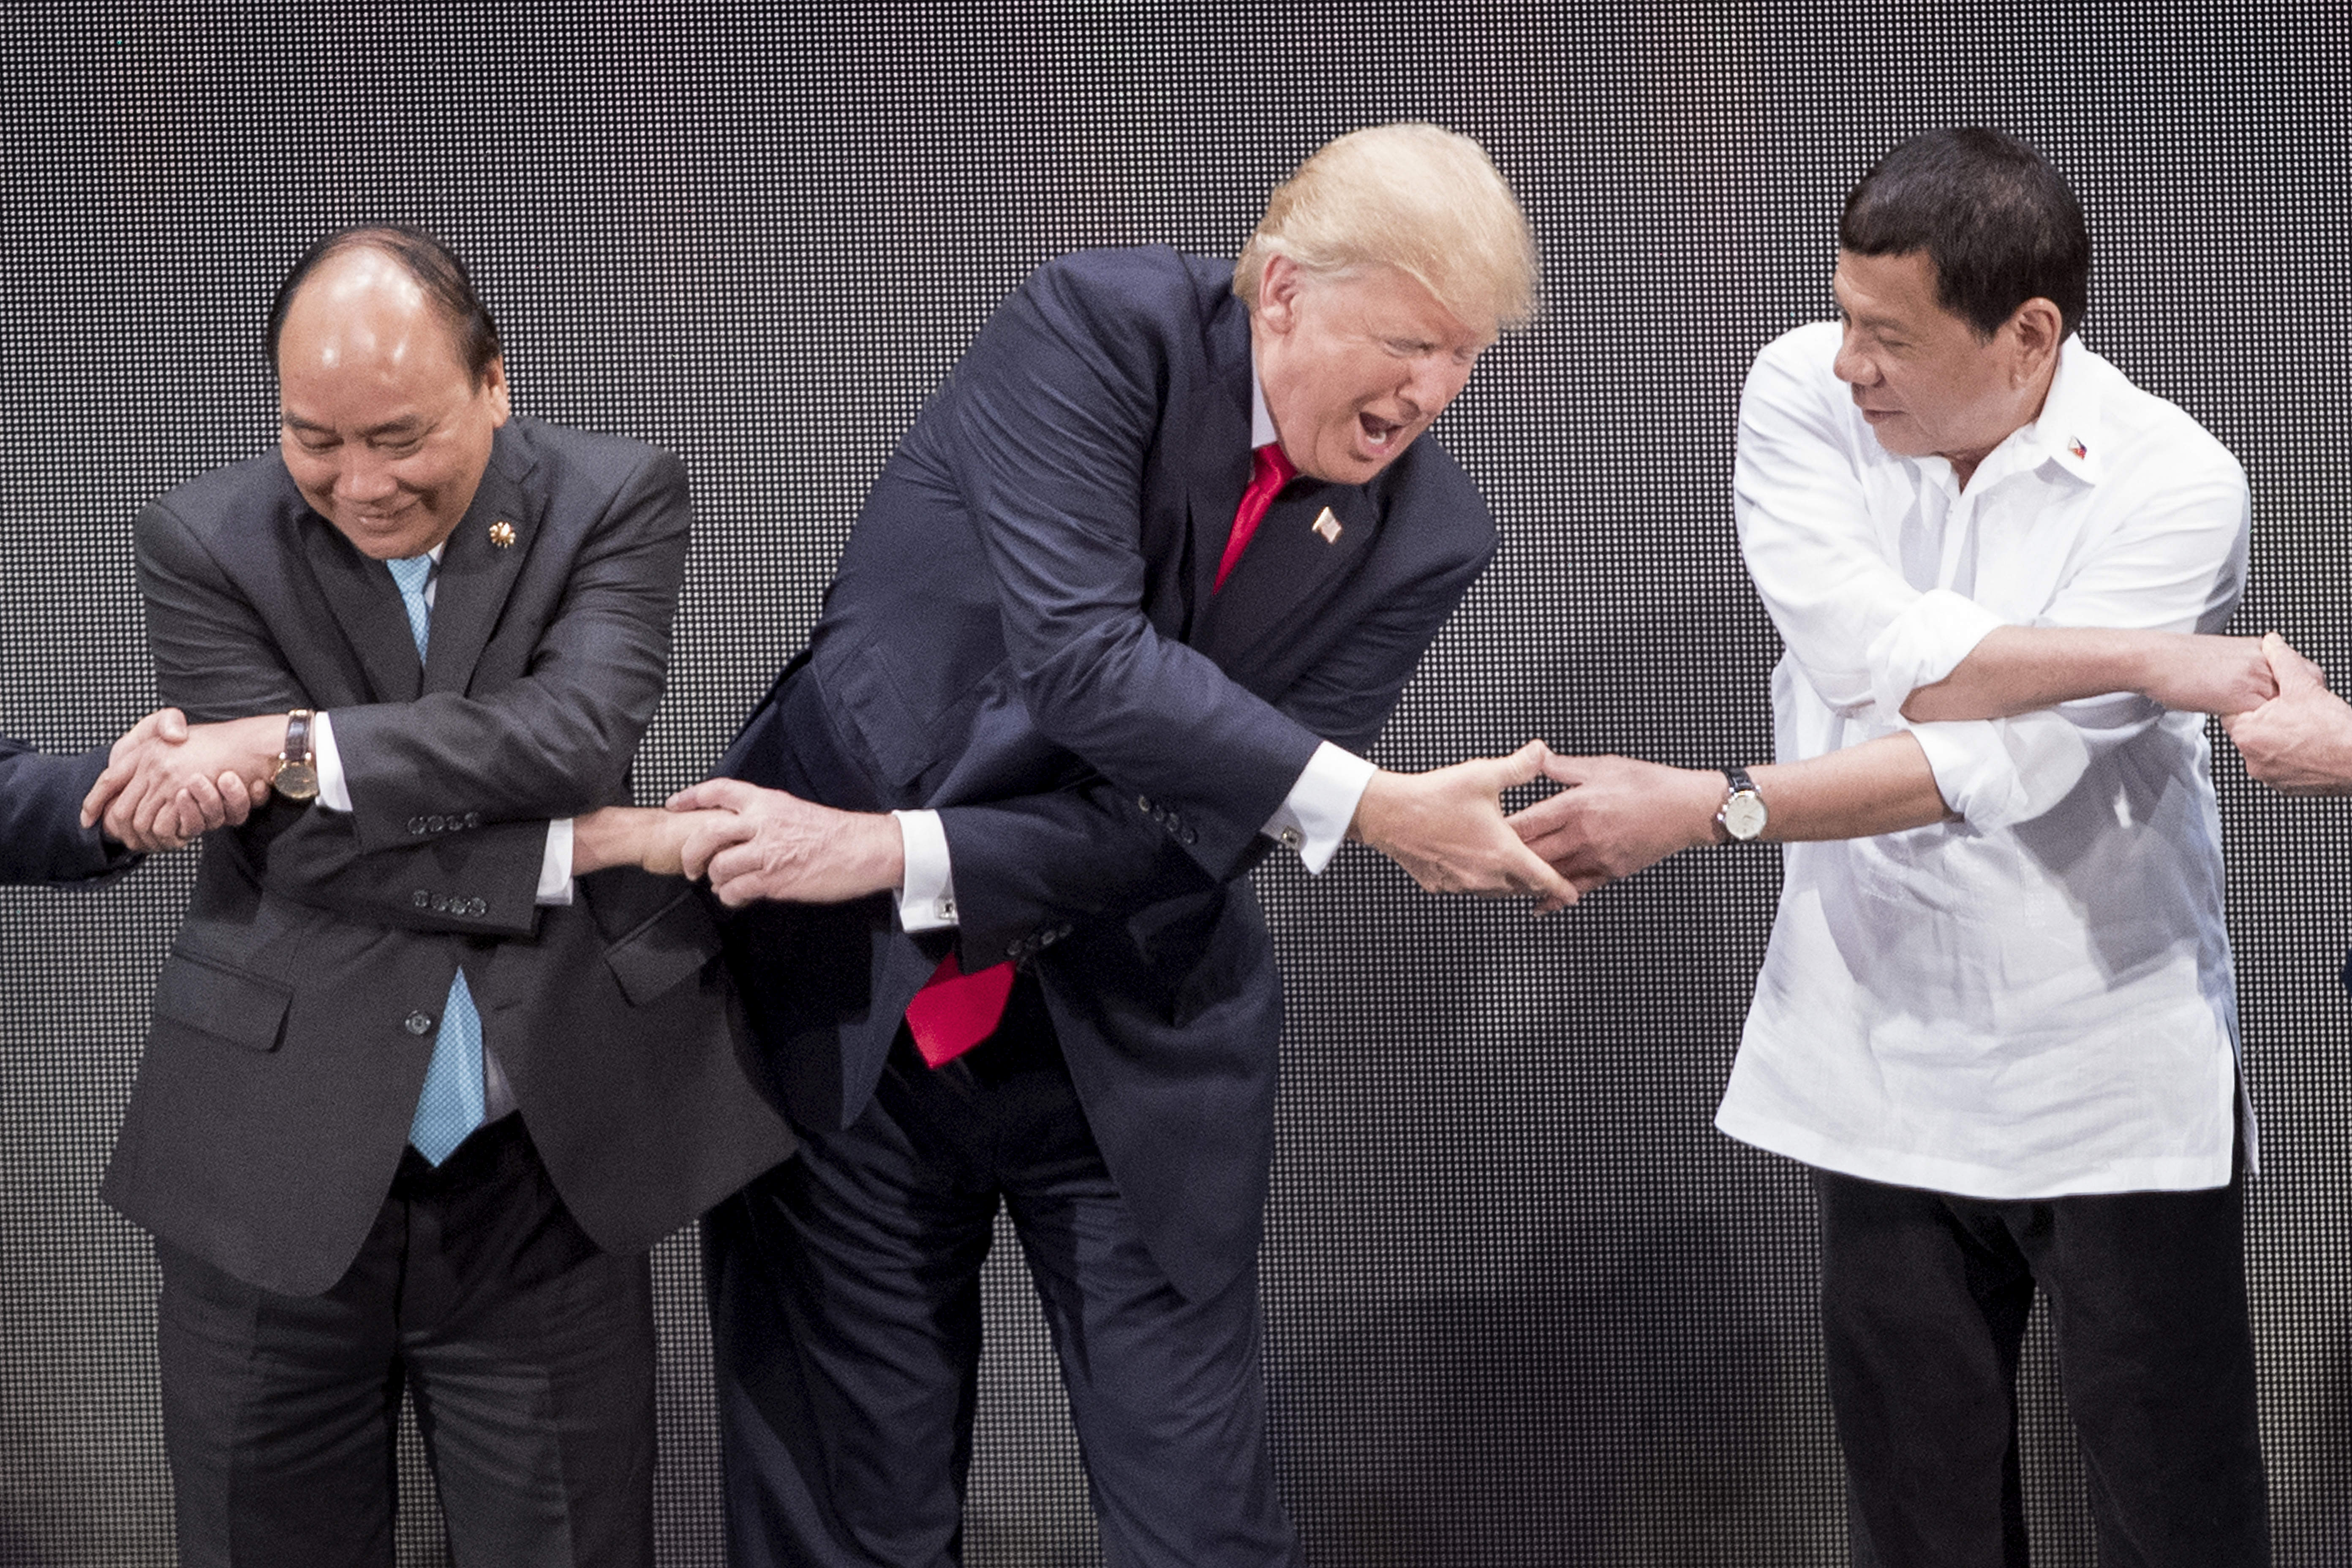 Vietnam's Prime Minister Nguyen Xuan Phuc (L), US President Donald Trump (C) and Philippine President Rodrigo Duterte join hands for the family photo during the 31st Association of South East Asian Nations (ASEAN) Summit in Manila on November 13, 2017. .World leaders are in the Philippines' capital for two days of summits.  / AFP PHOTO / JIM WATSON